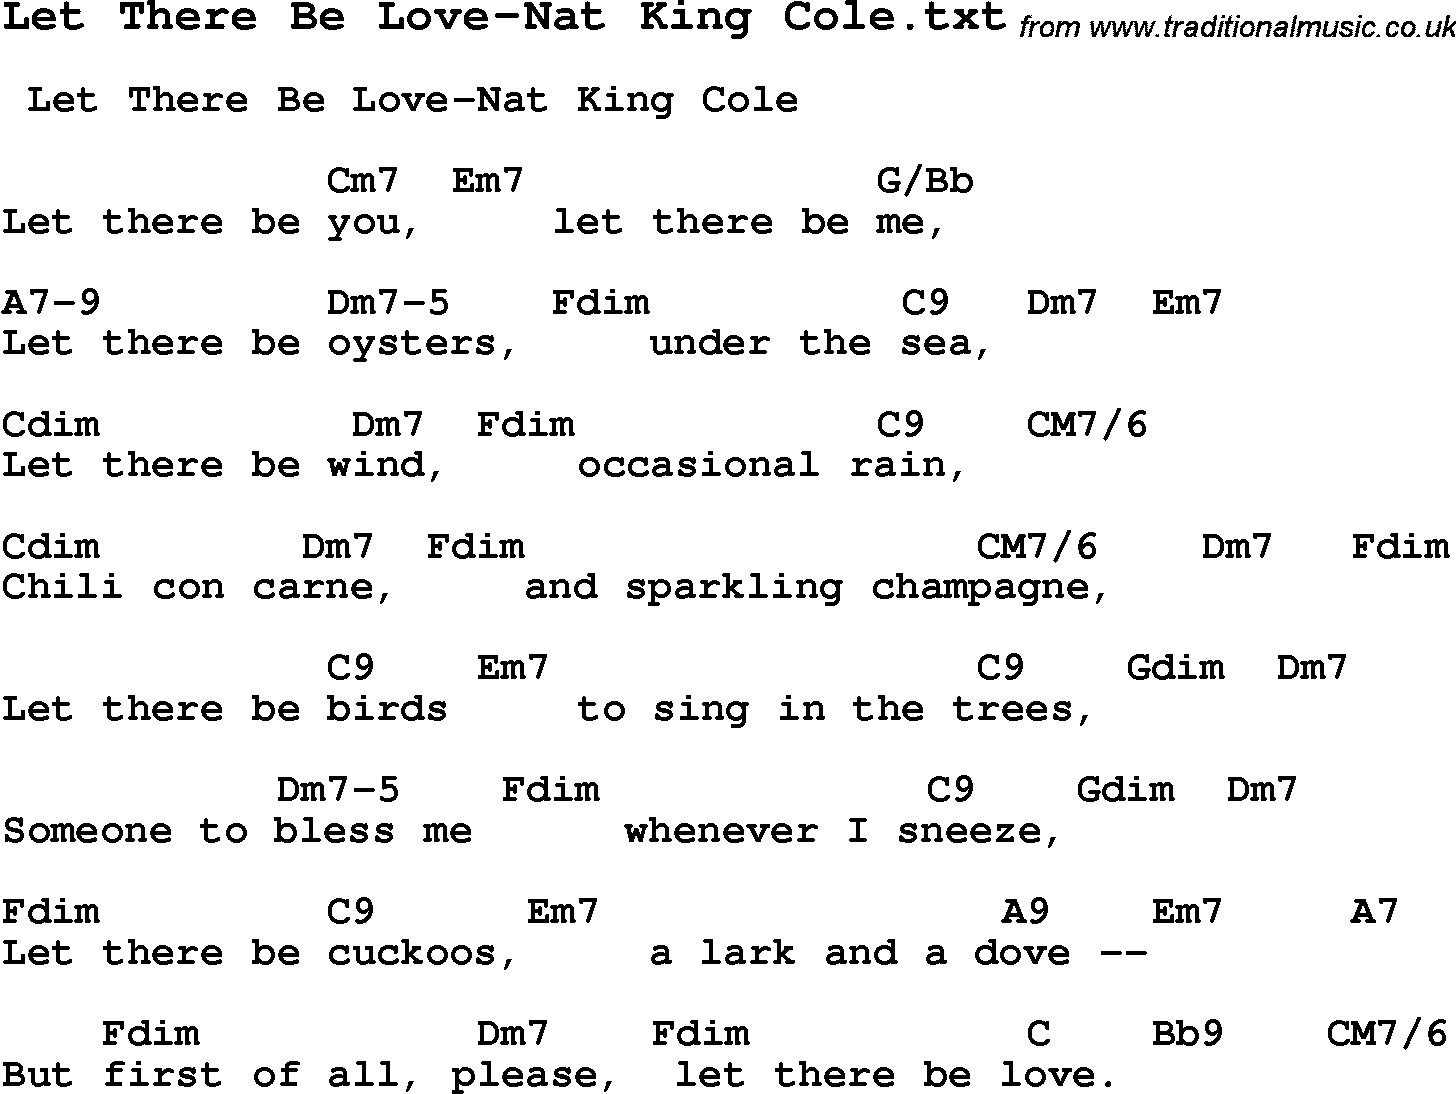 Jazz Song Let There Be Love Nat King Cole With Chords Tabs And Lyrics From Top Bands And Artists